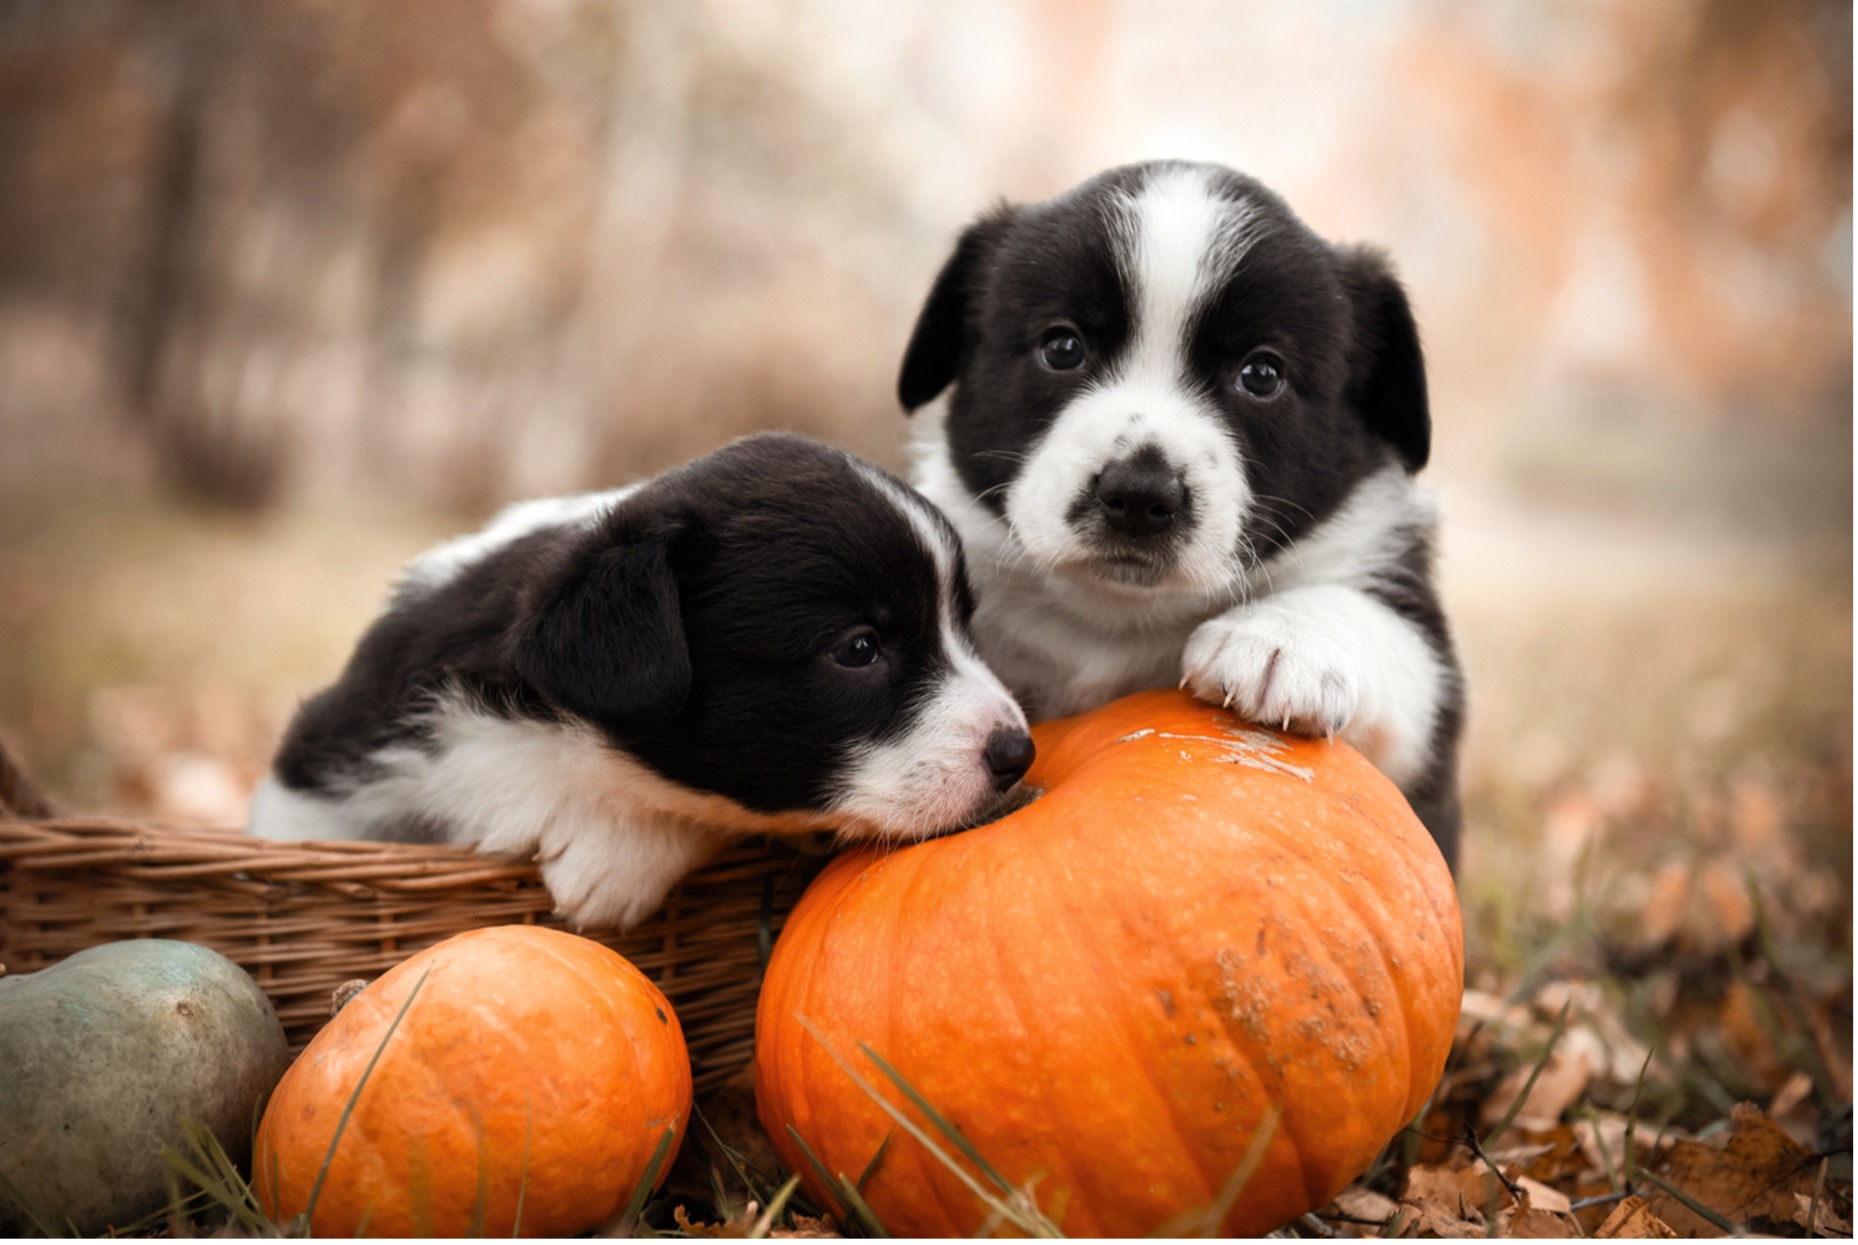 Two puppies in a basket with pumpkins